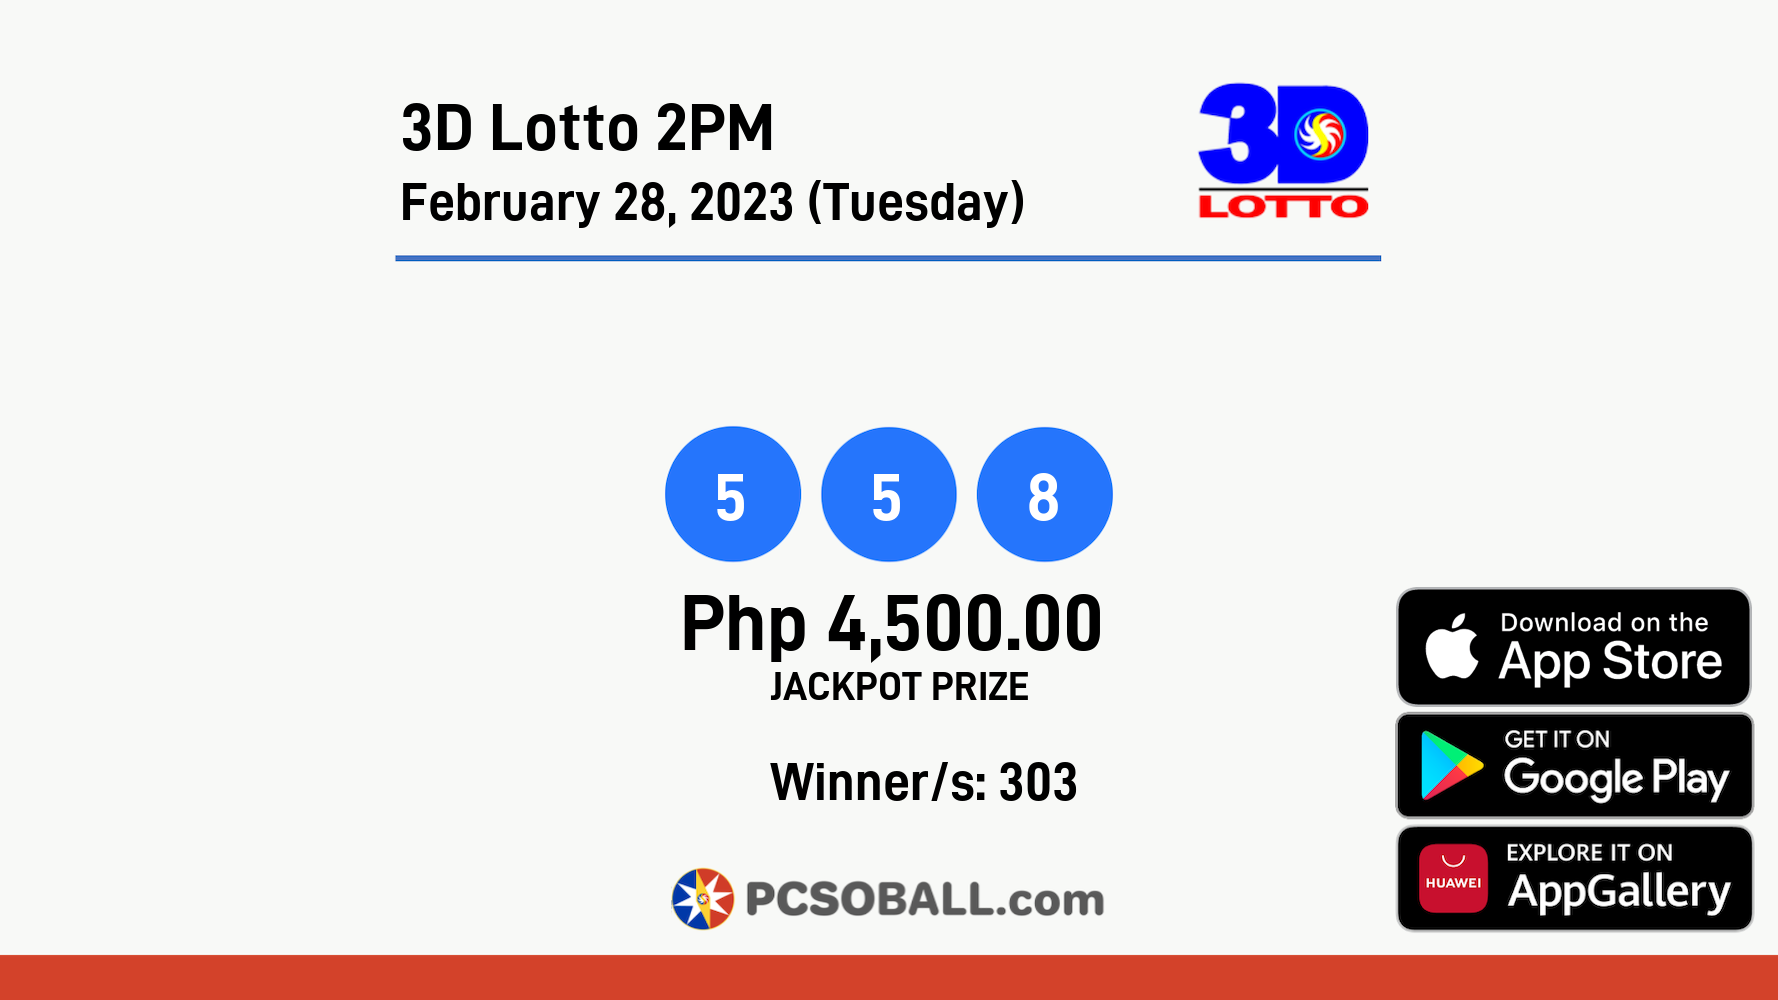 3D Lotto 2PM February 28, 2023 (Tuesday) Result